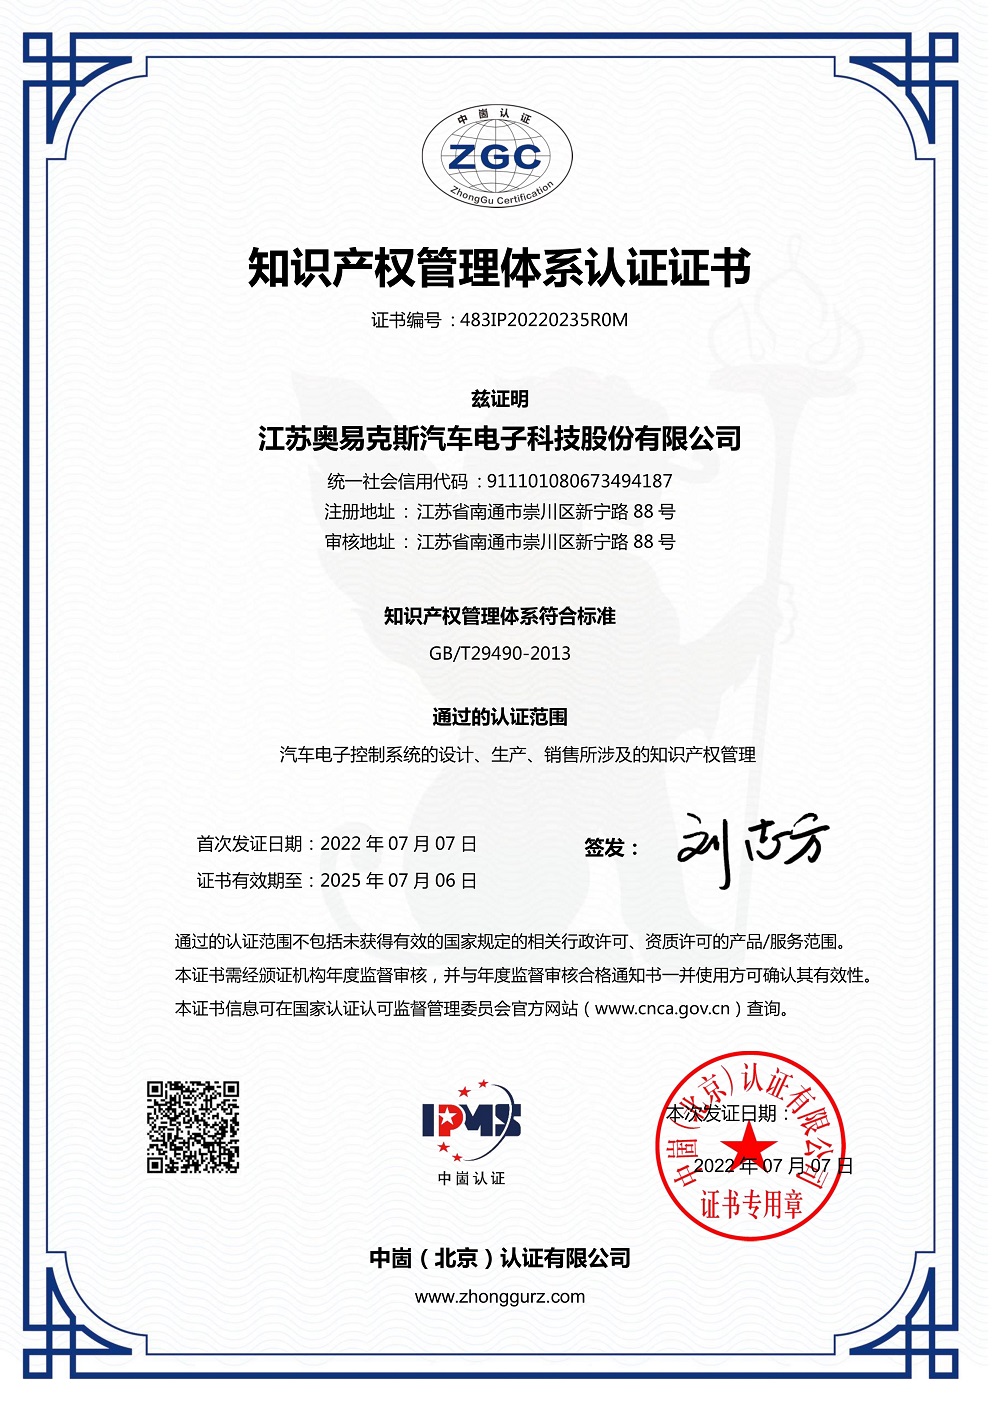 AECS-Intellectual Property Right Management System Certification of 2022